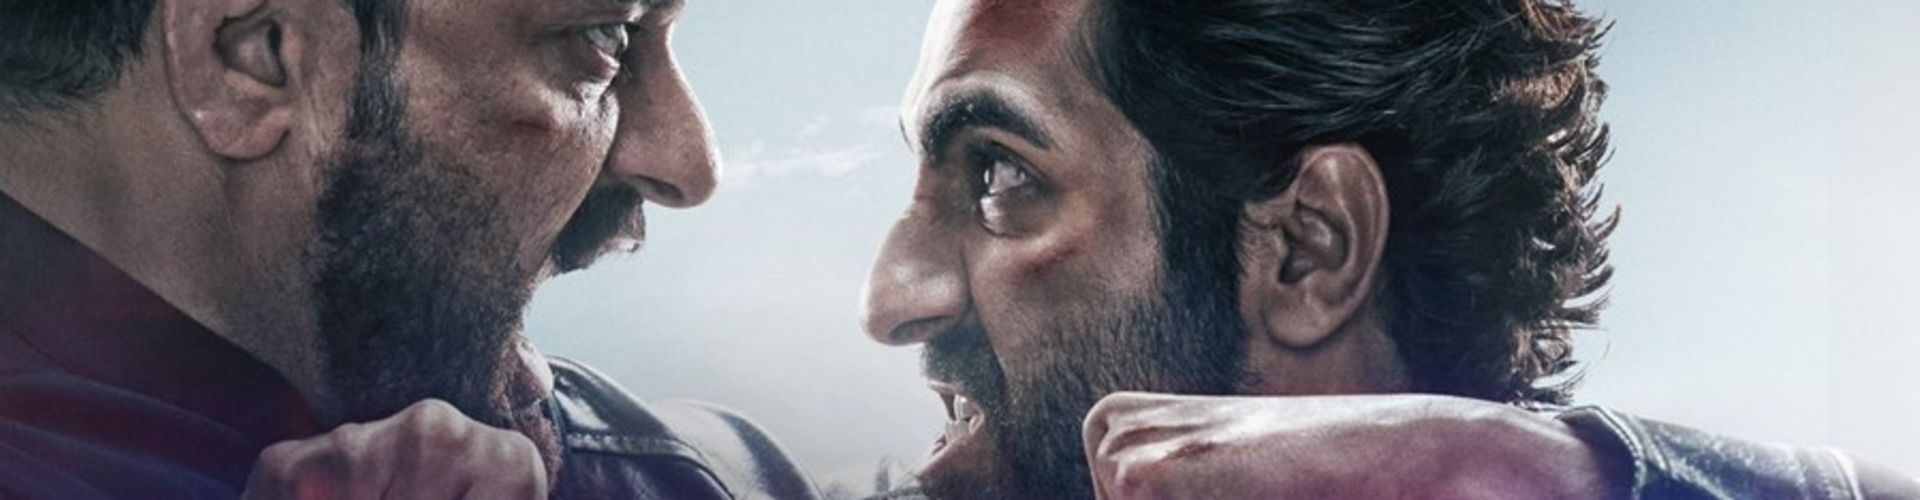 An Action Hero Trailer Is Out, Starring Ayushmann Khurrana And Jaideep Ahlawat